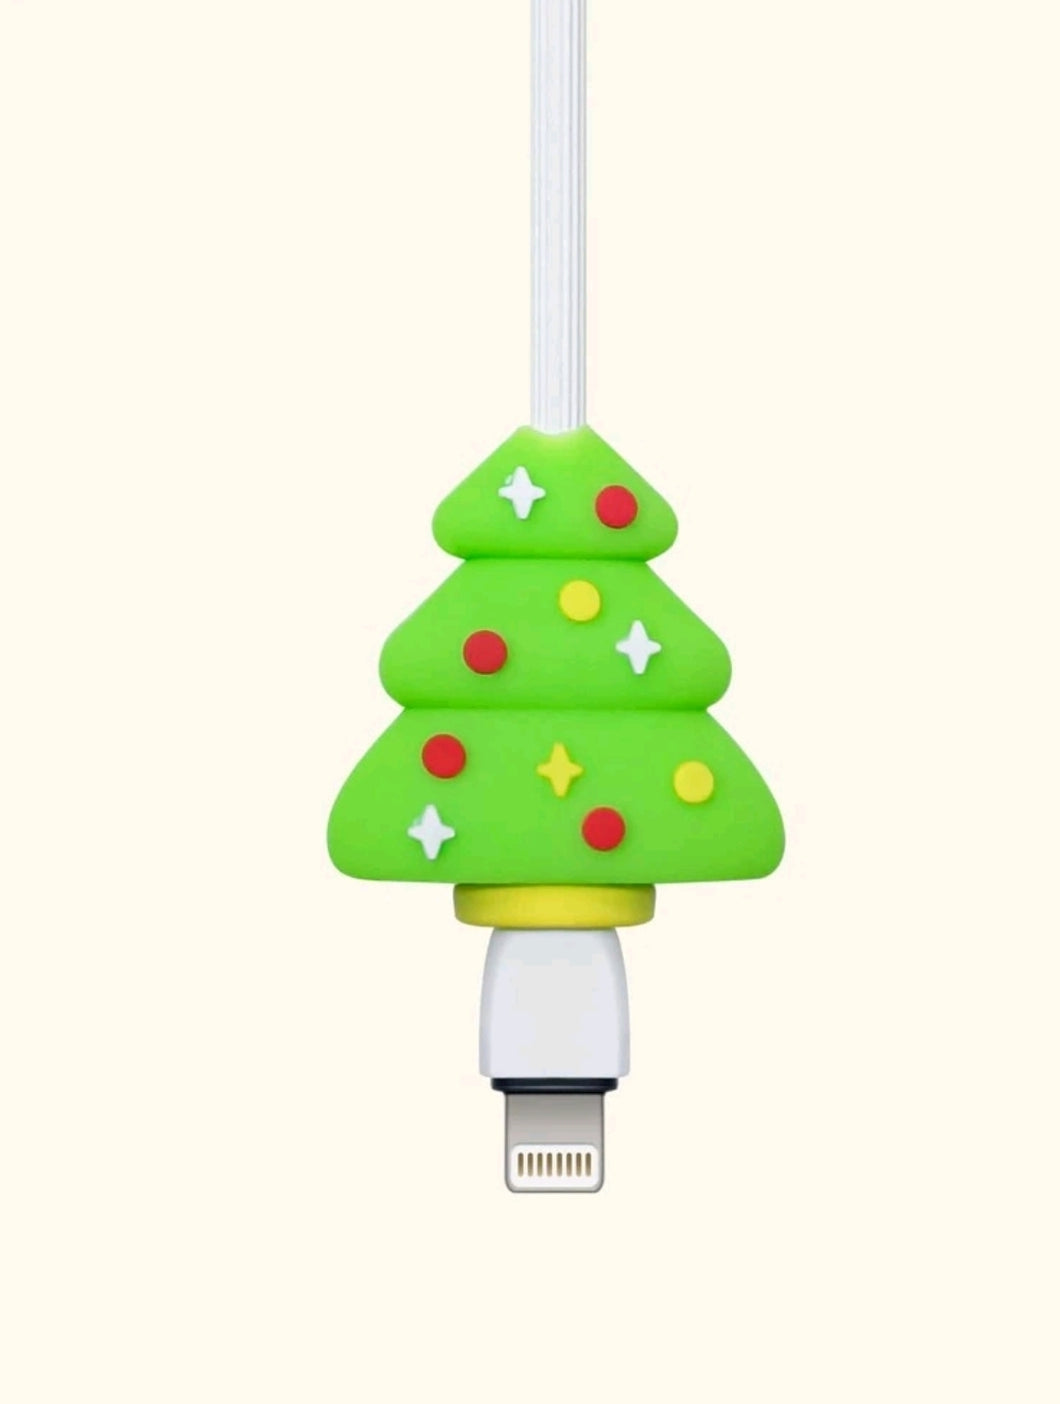 This Christmas, do not give up being highly tech! Get this cute data cable protector (Christmas Tree design) for mobile phone charger. During the holidays, show this accessory for technological devices to your friends, they will love it!  Color: Green Pattern Type: Christmas Type: Cables Protectors Material: Silica gel Size: Length 3cm (1.2 inch) X Width 3cm (1.2 inch) X Height 1.2cm (0.5 inch)